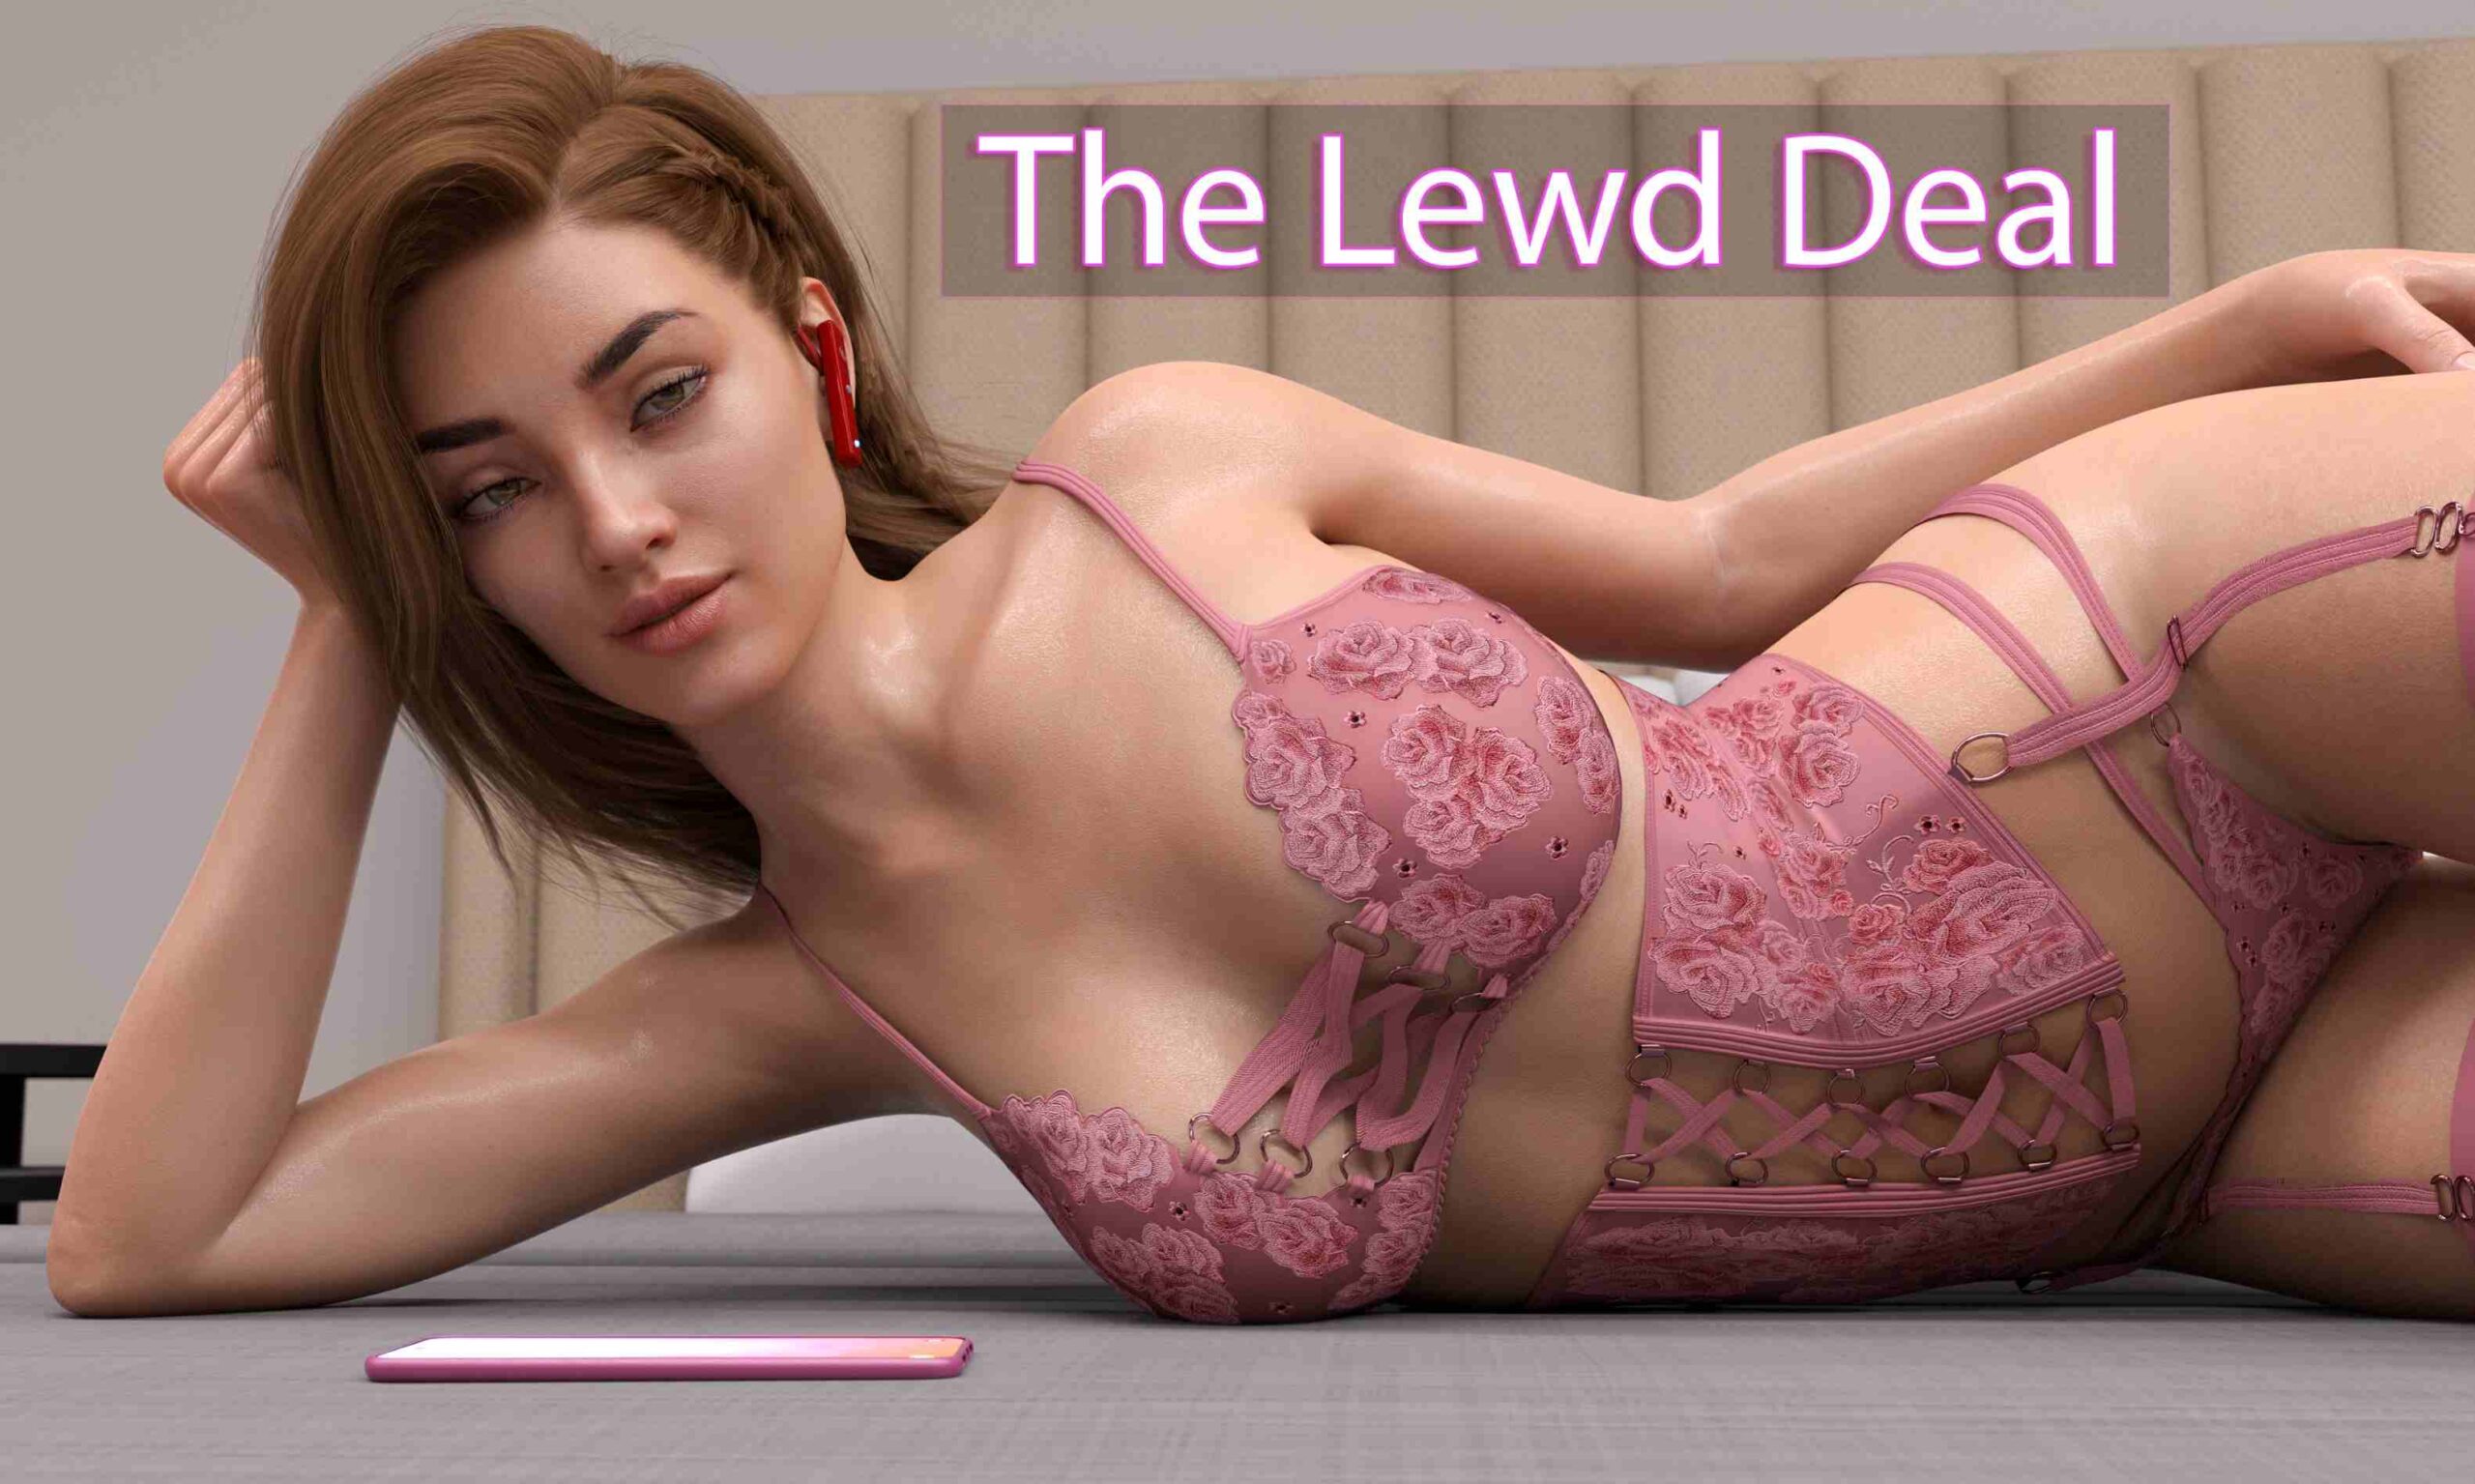 The Lewd Deal [Mr.Creep Games] Adult xxx Game Download